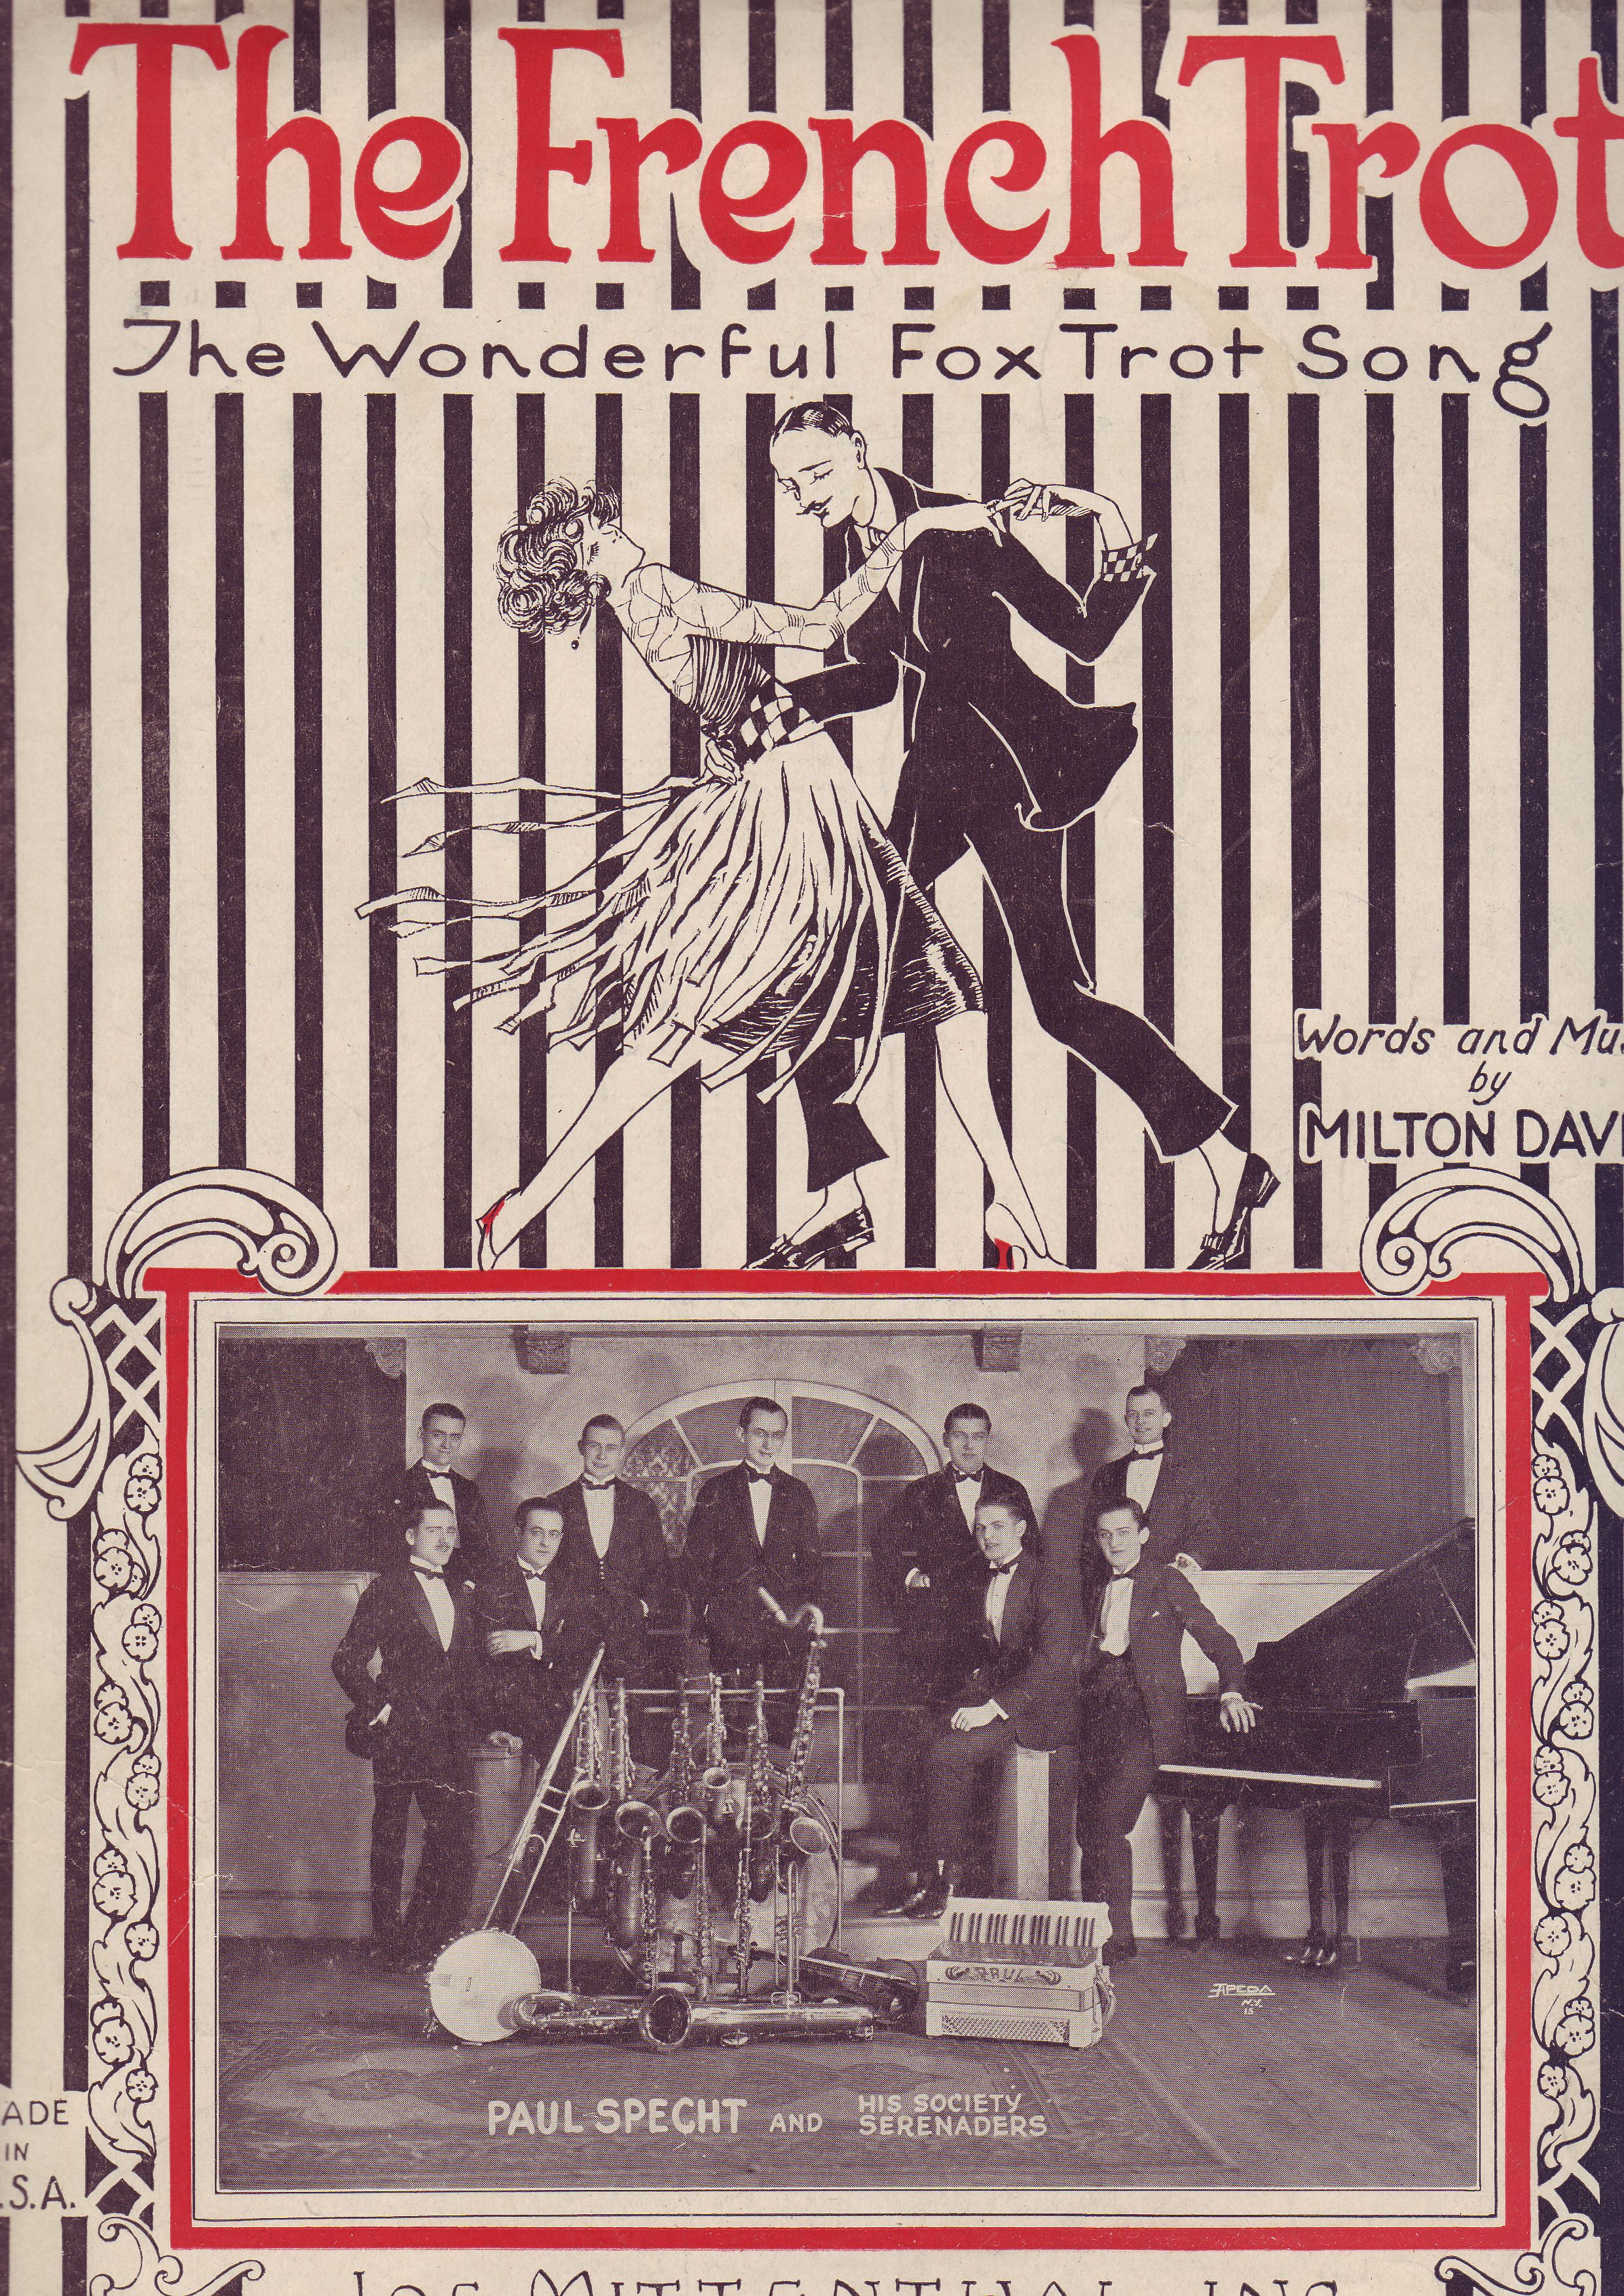 Paul Specht & His Society Serenaders - The French Trot (1922)